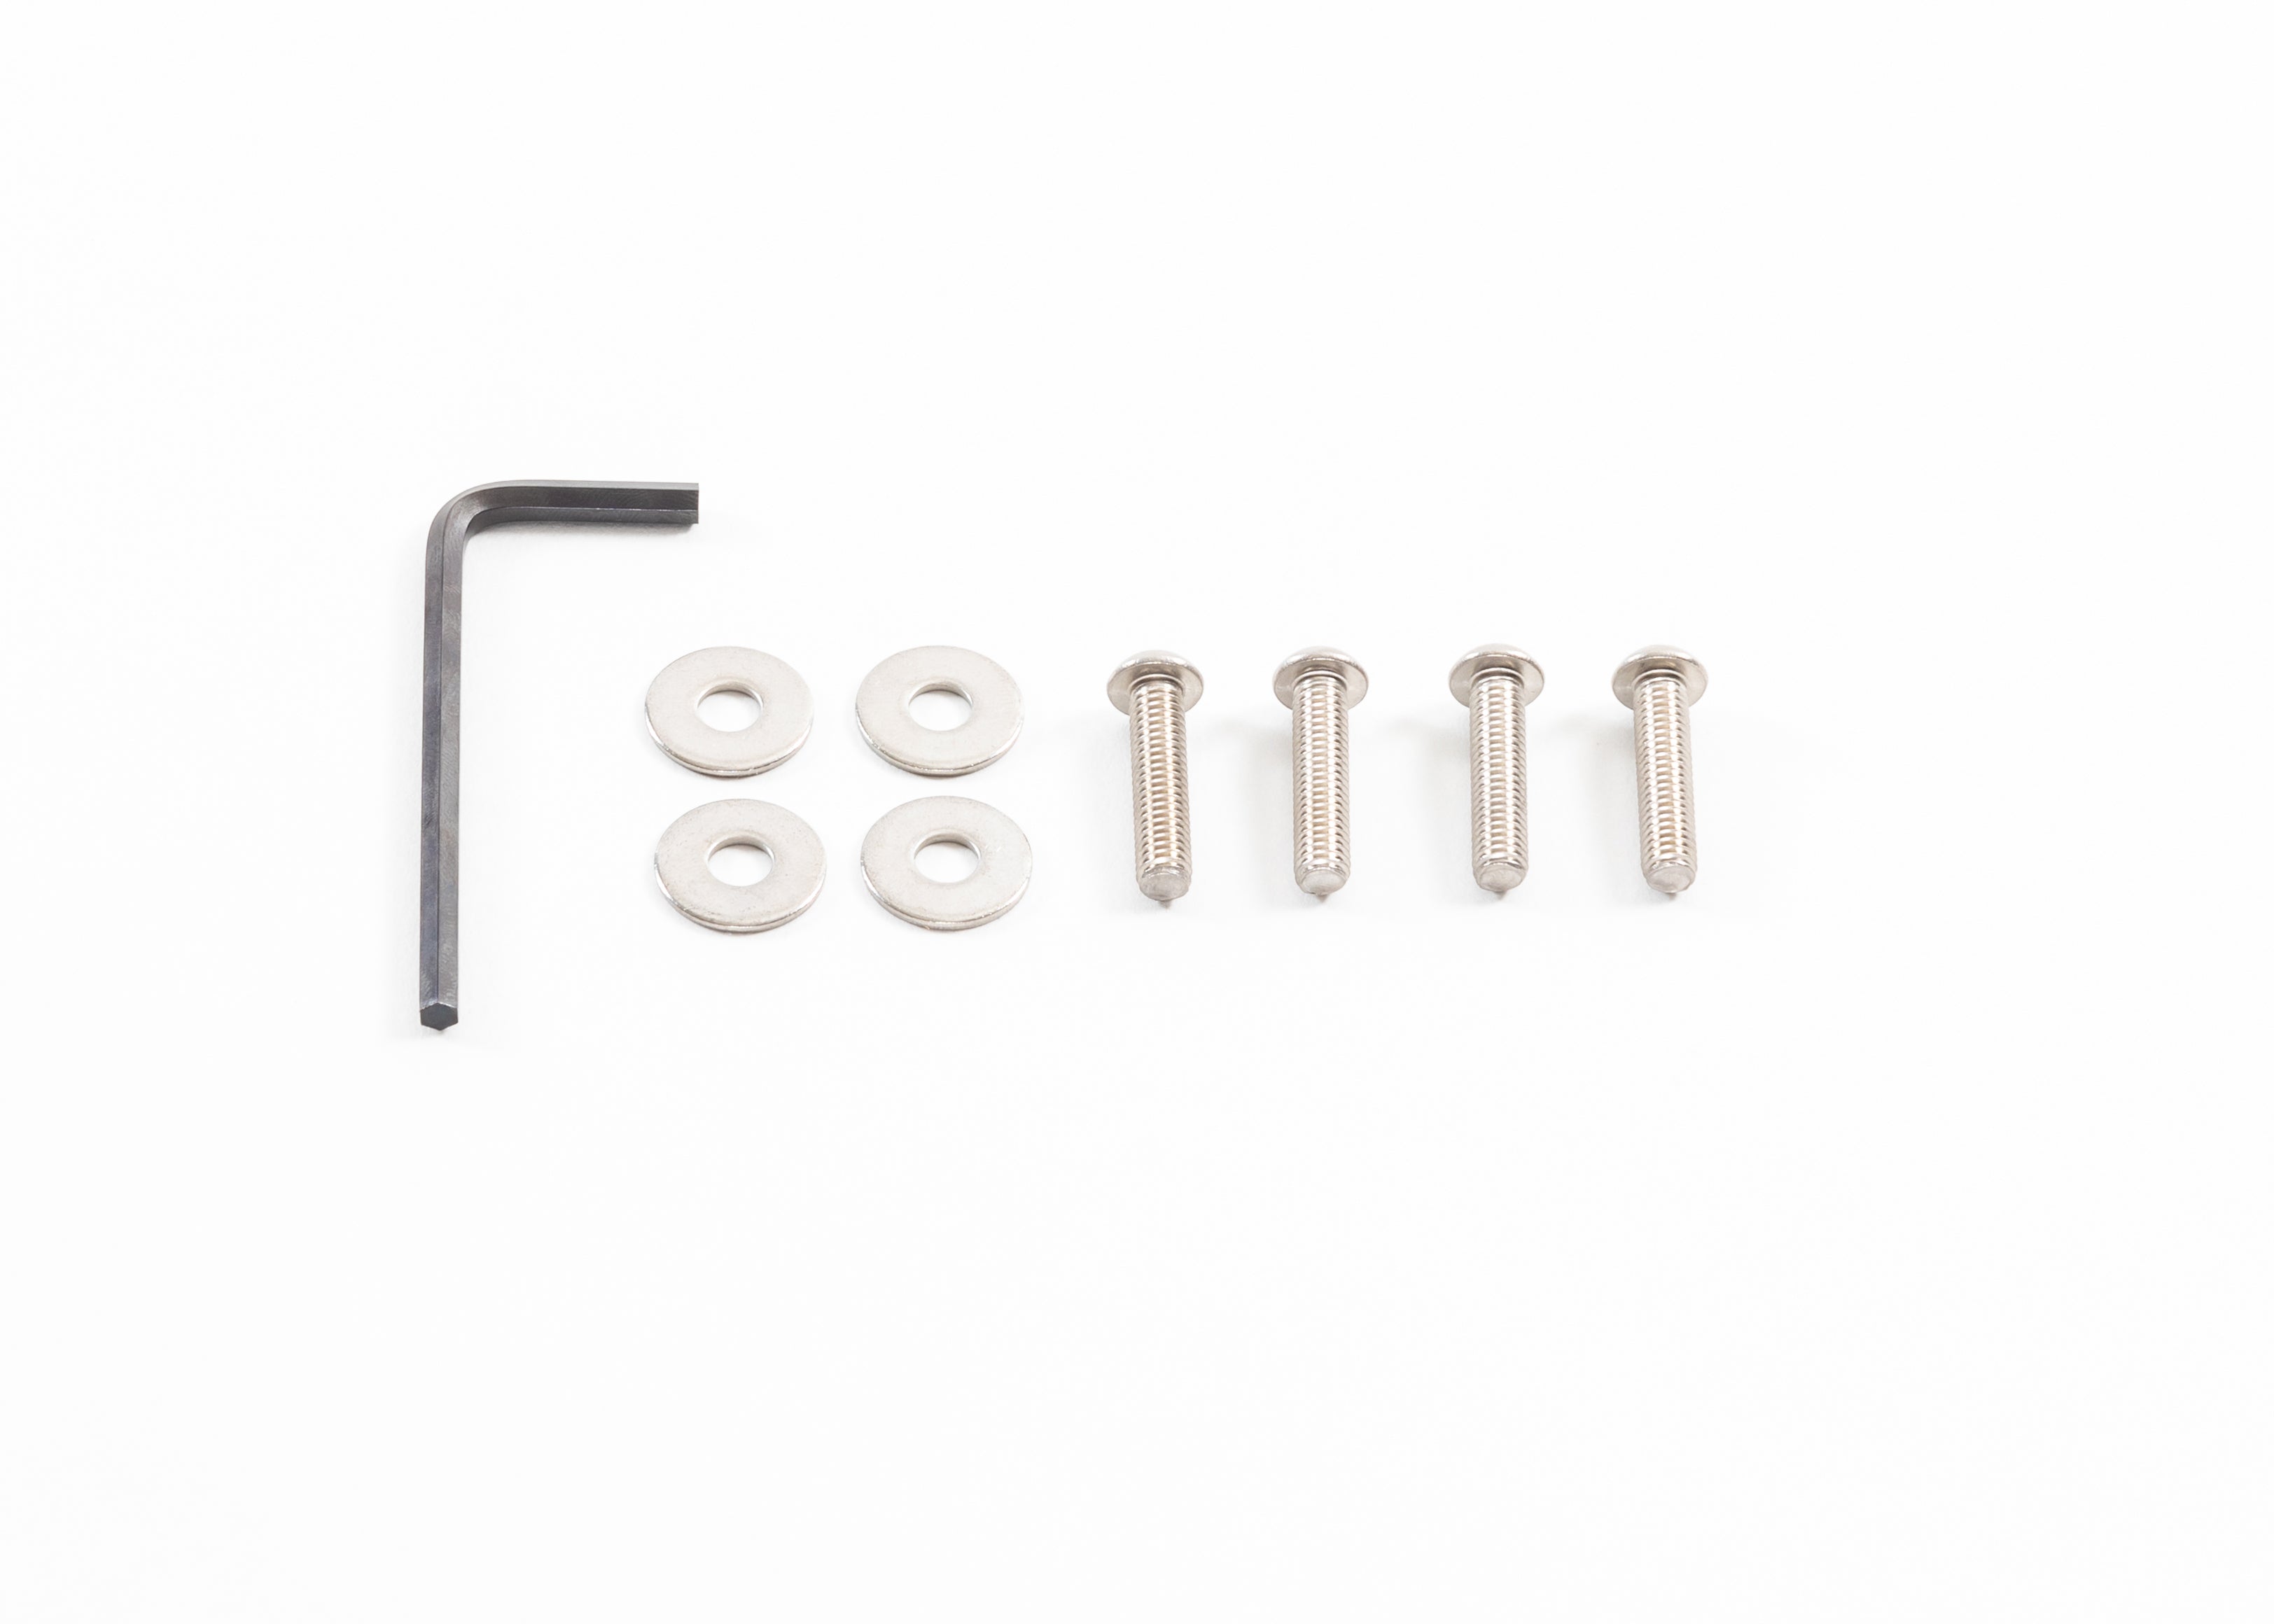 Stainless steel bolts, washers, and allen key - 4 pack